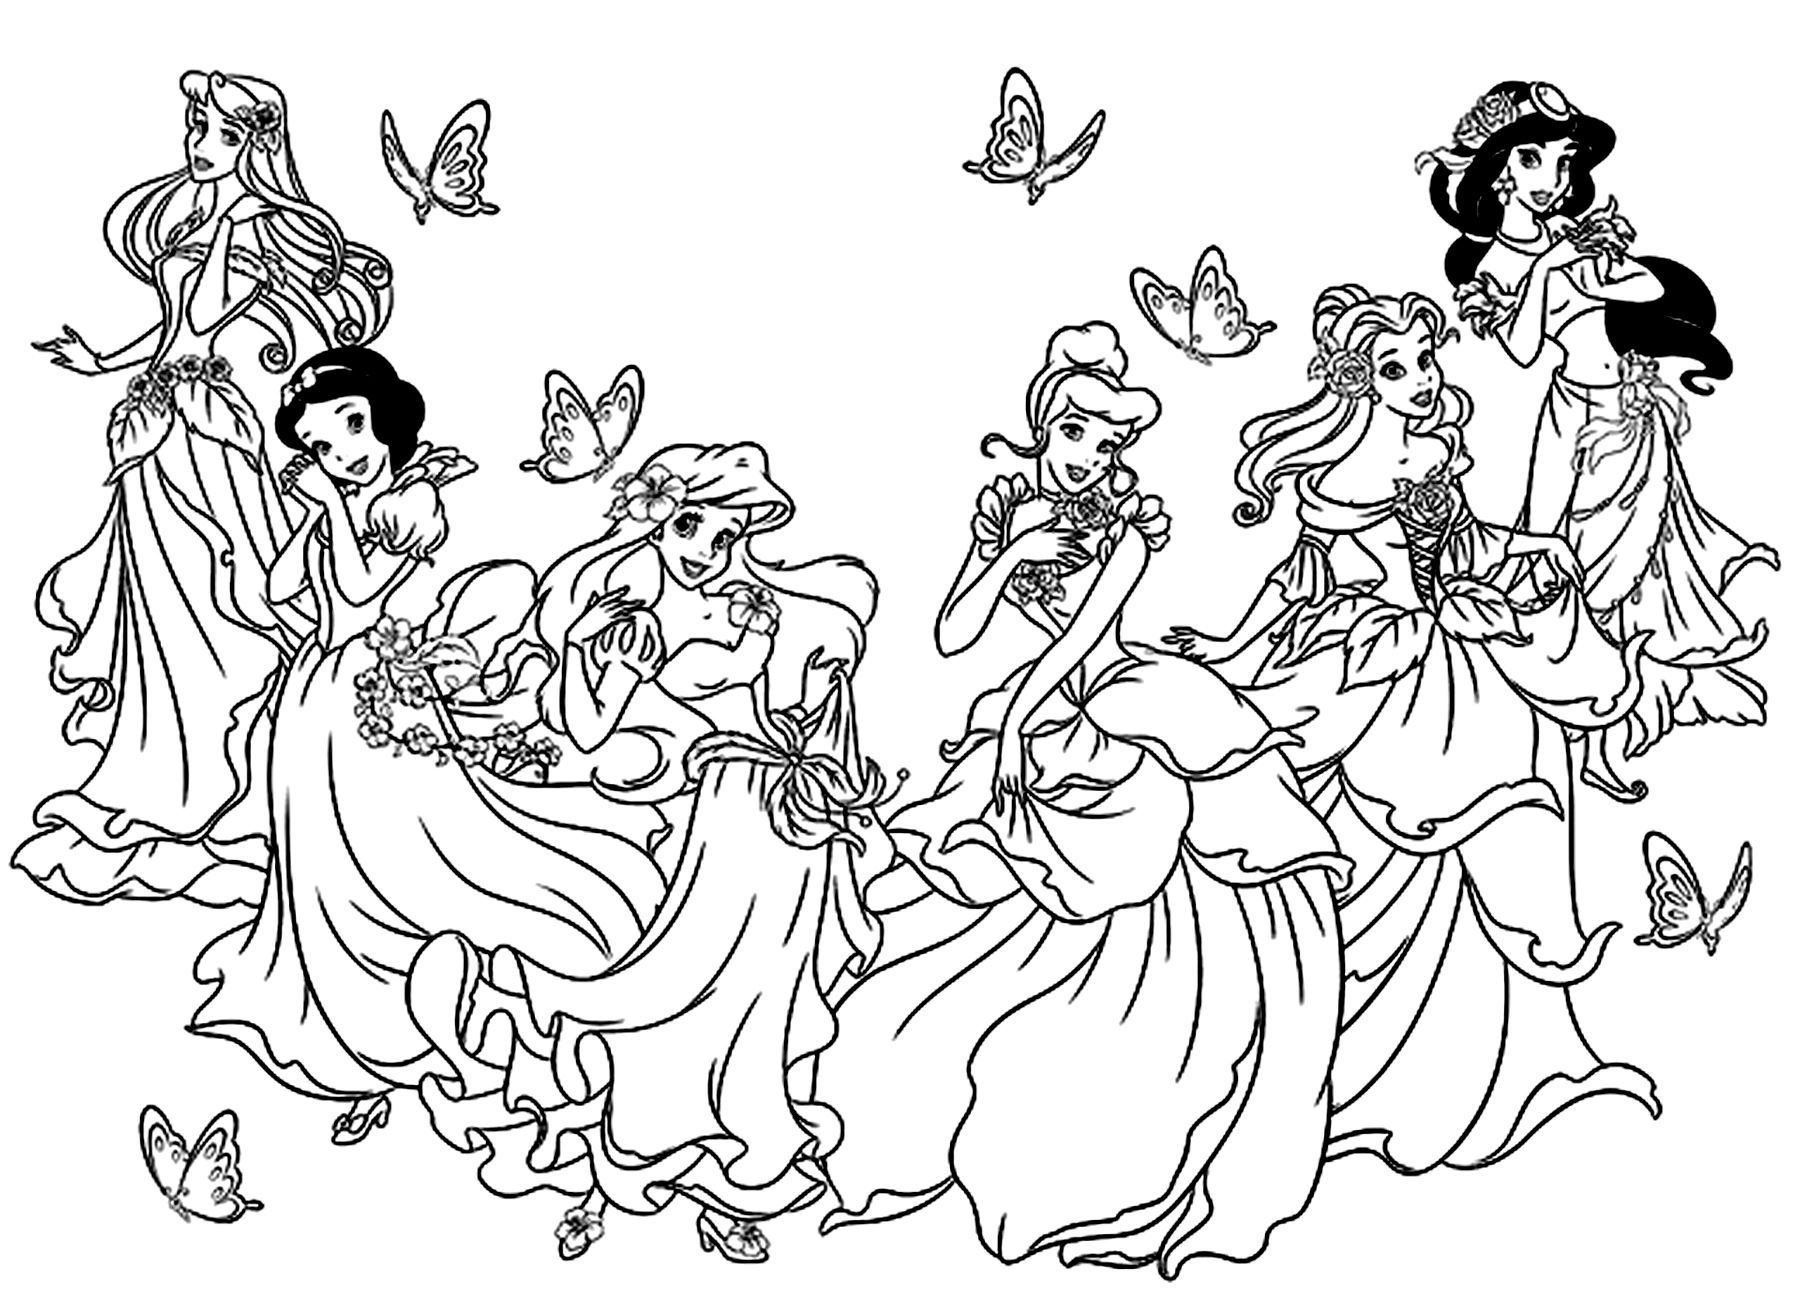 Coloriage Dysney Génial to Print This Free Coloring Page Coloring All Princesses